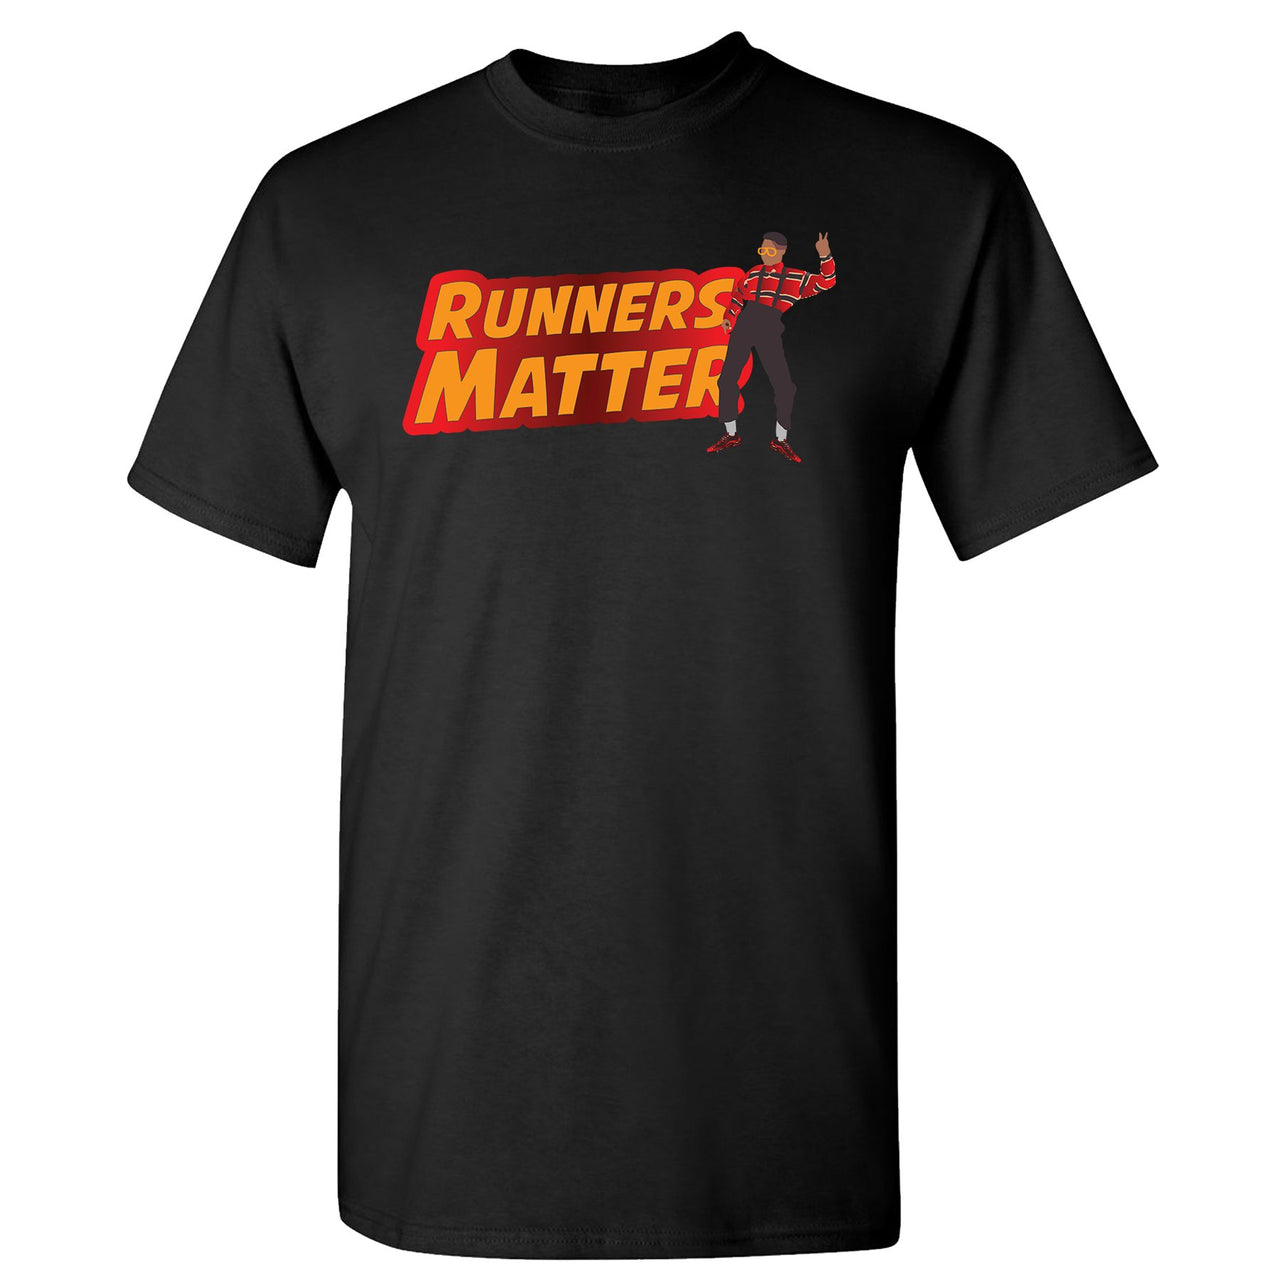 Printed on the front of the Air Max 97 Sunburst black sneaker matching t-shirt is the Runners Matter logo